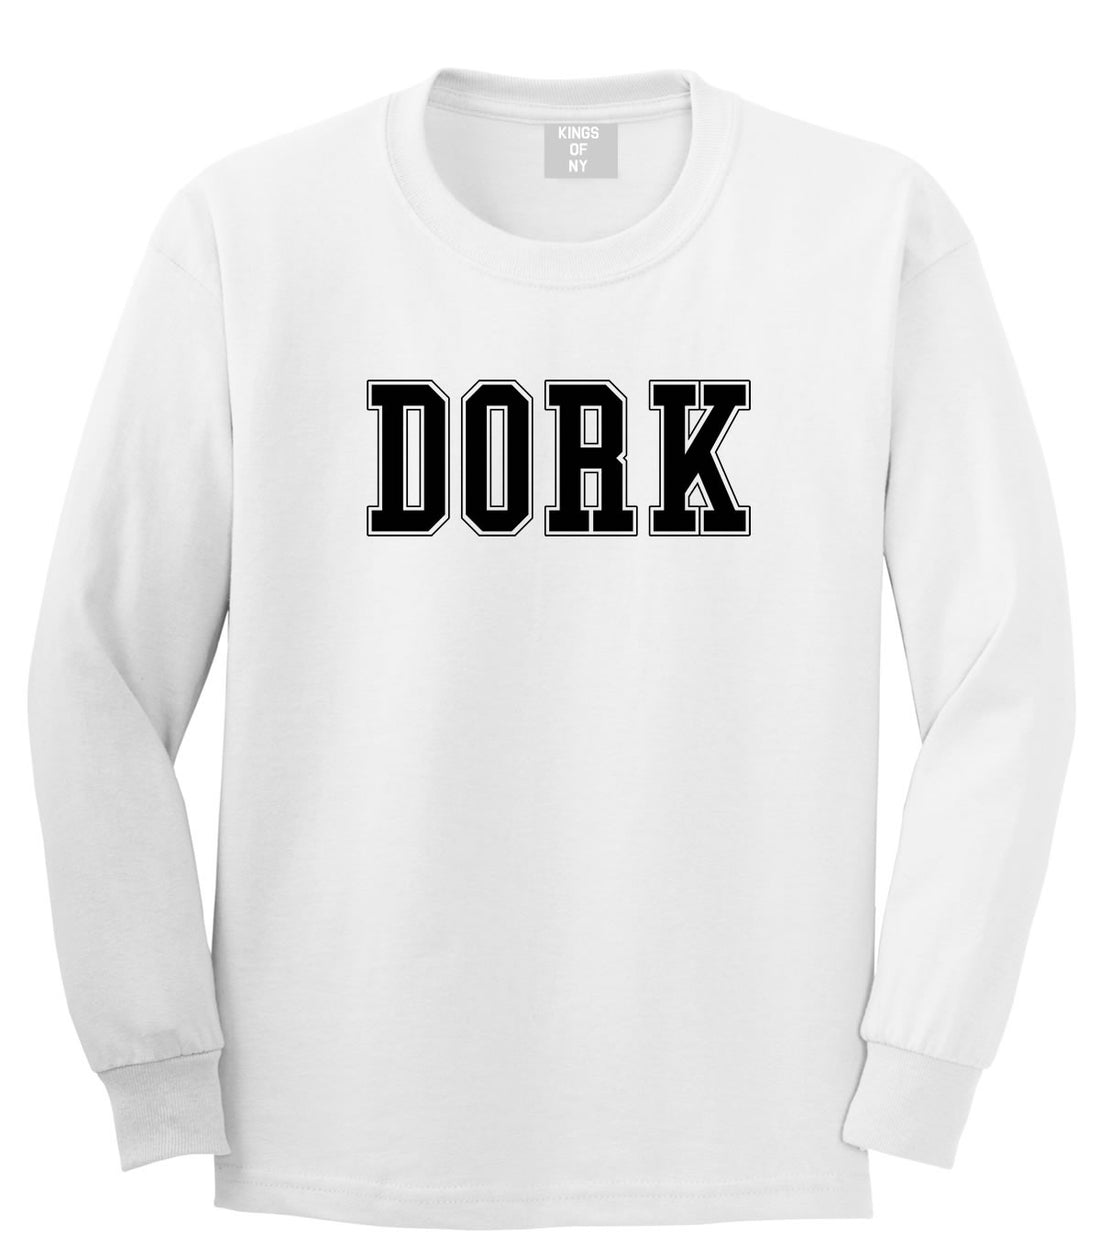 Dork College Style Long Sleeve T-Shirt in White By Kings Of NY